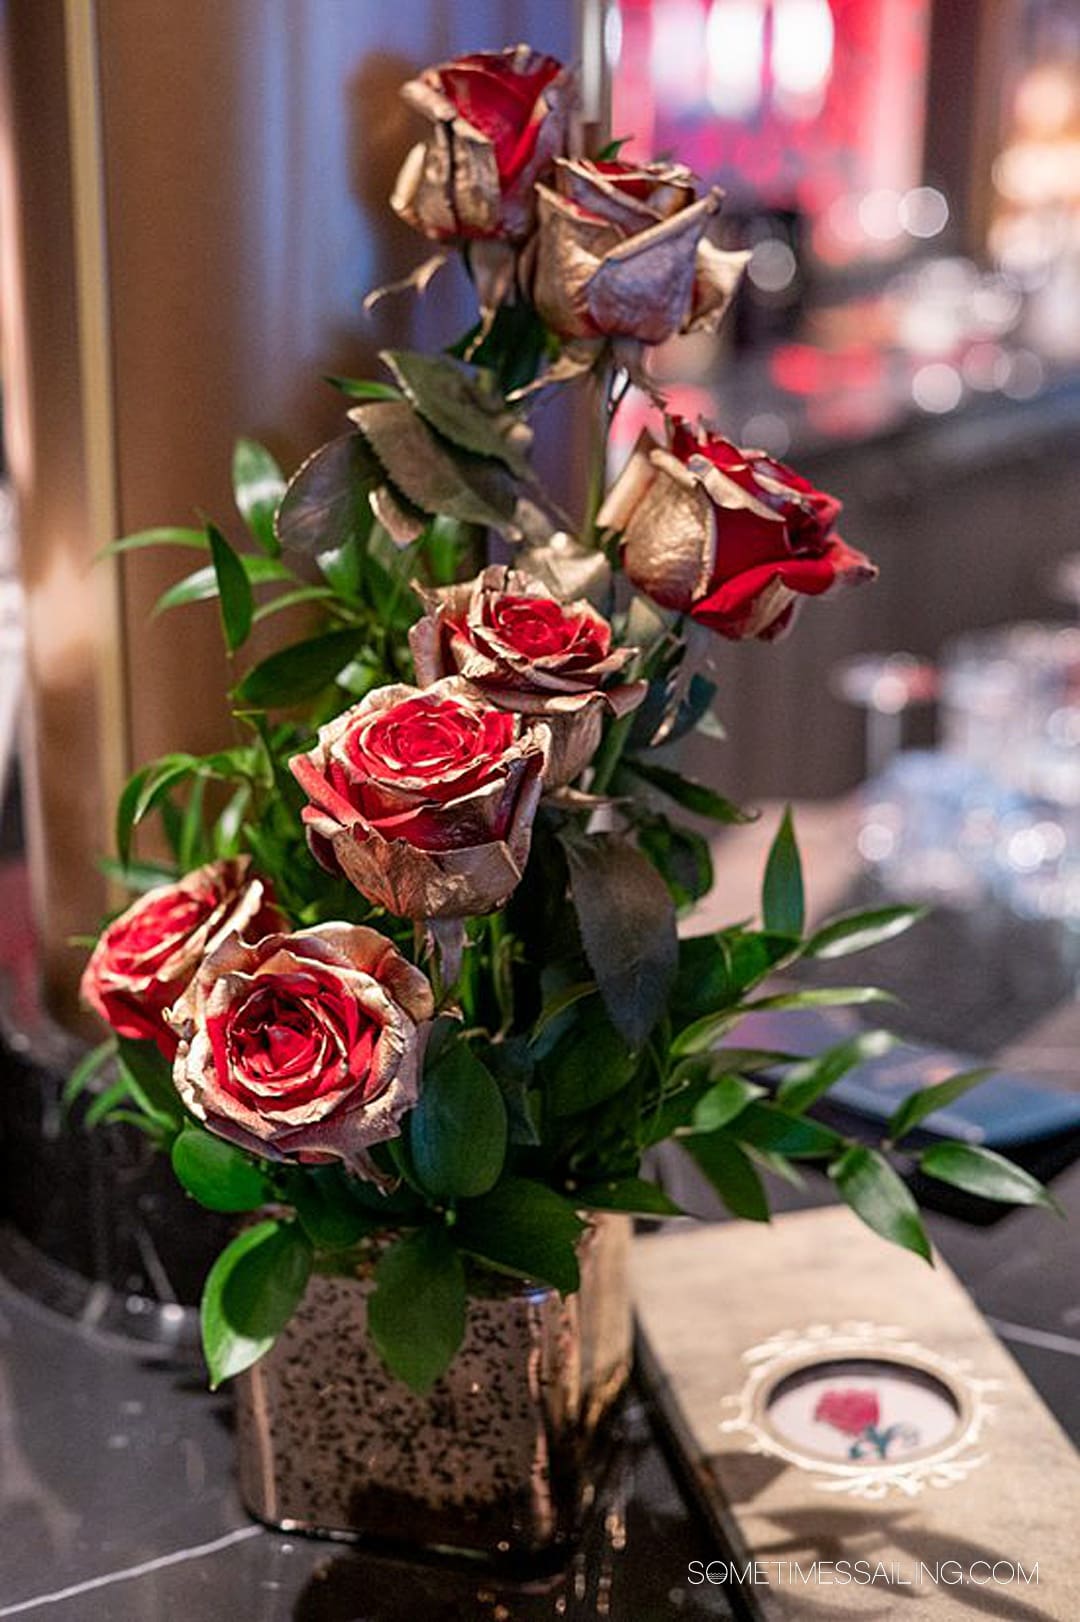 Gold-painted red roses at The Rose bar on Disney Wish.